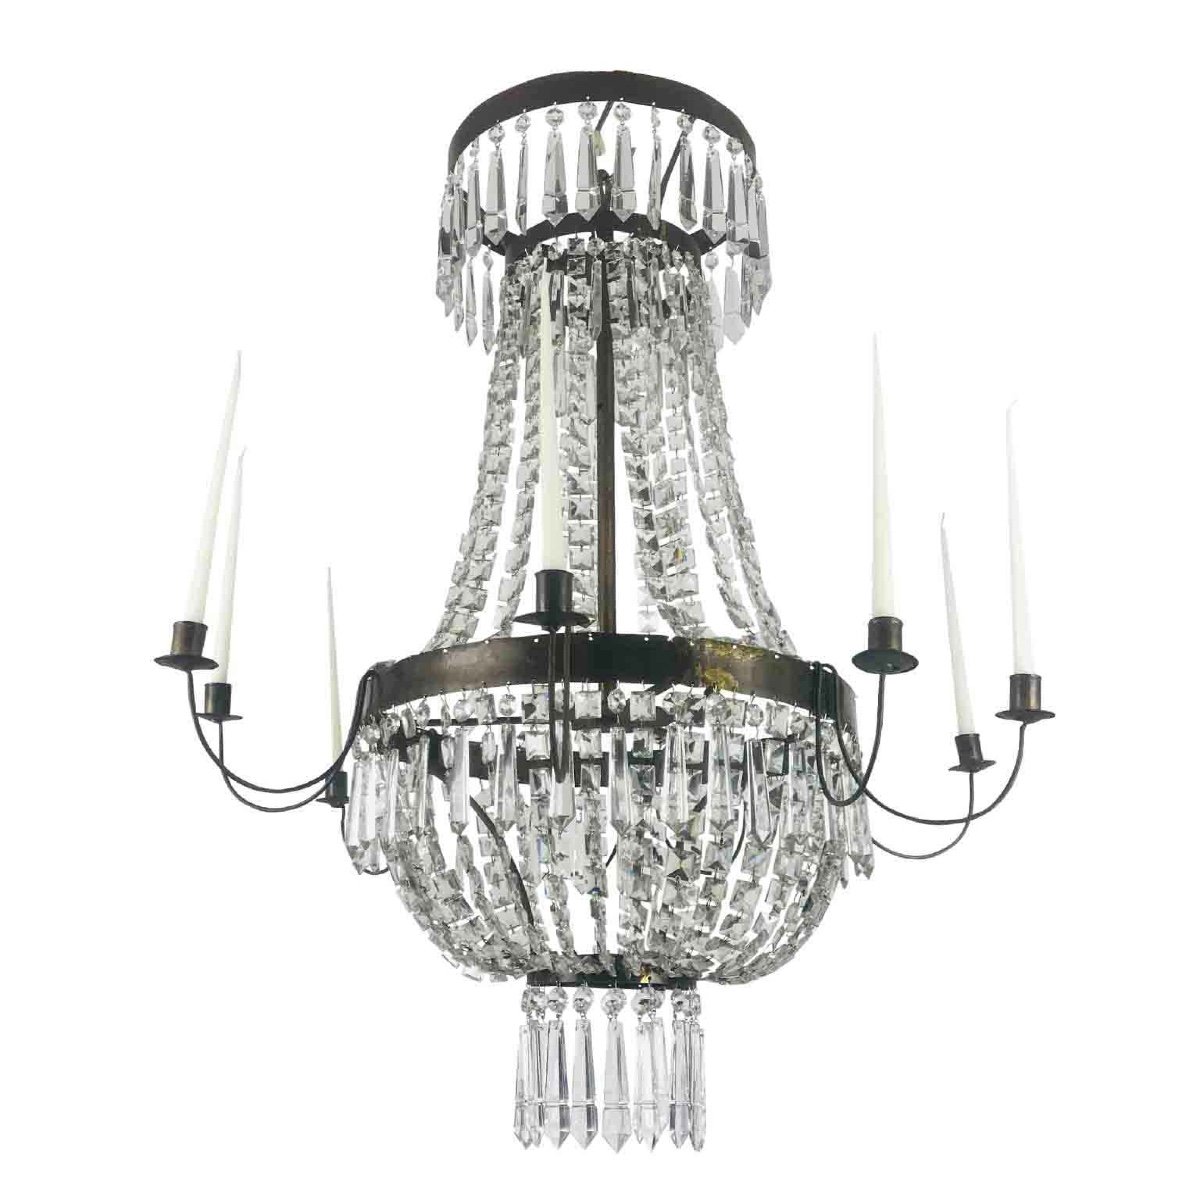 19th Century Italian Empire Crystal Chandelier Nine-armed Candle Chandelier-photo-3